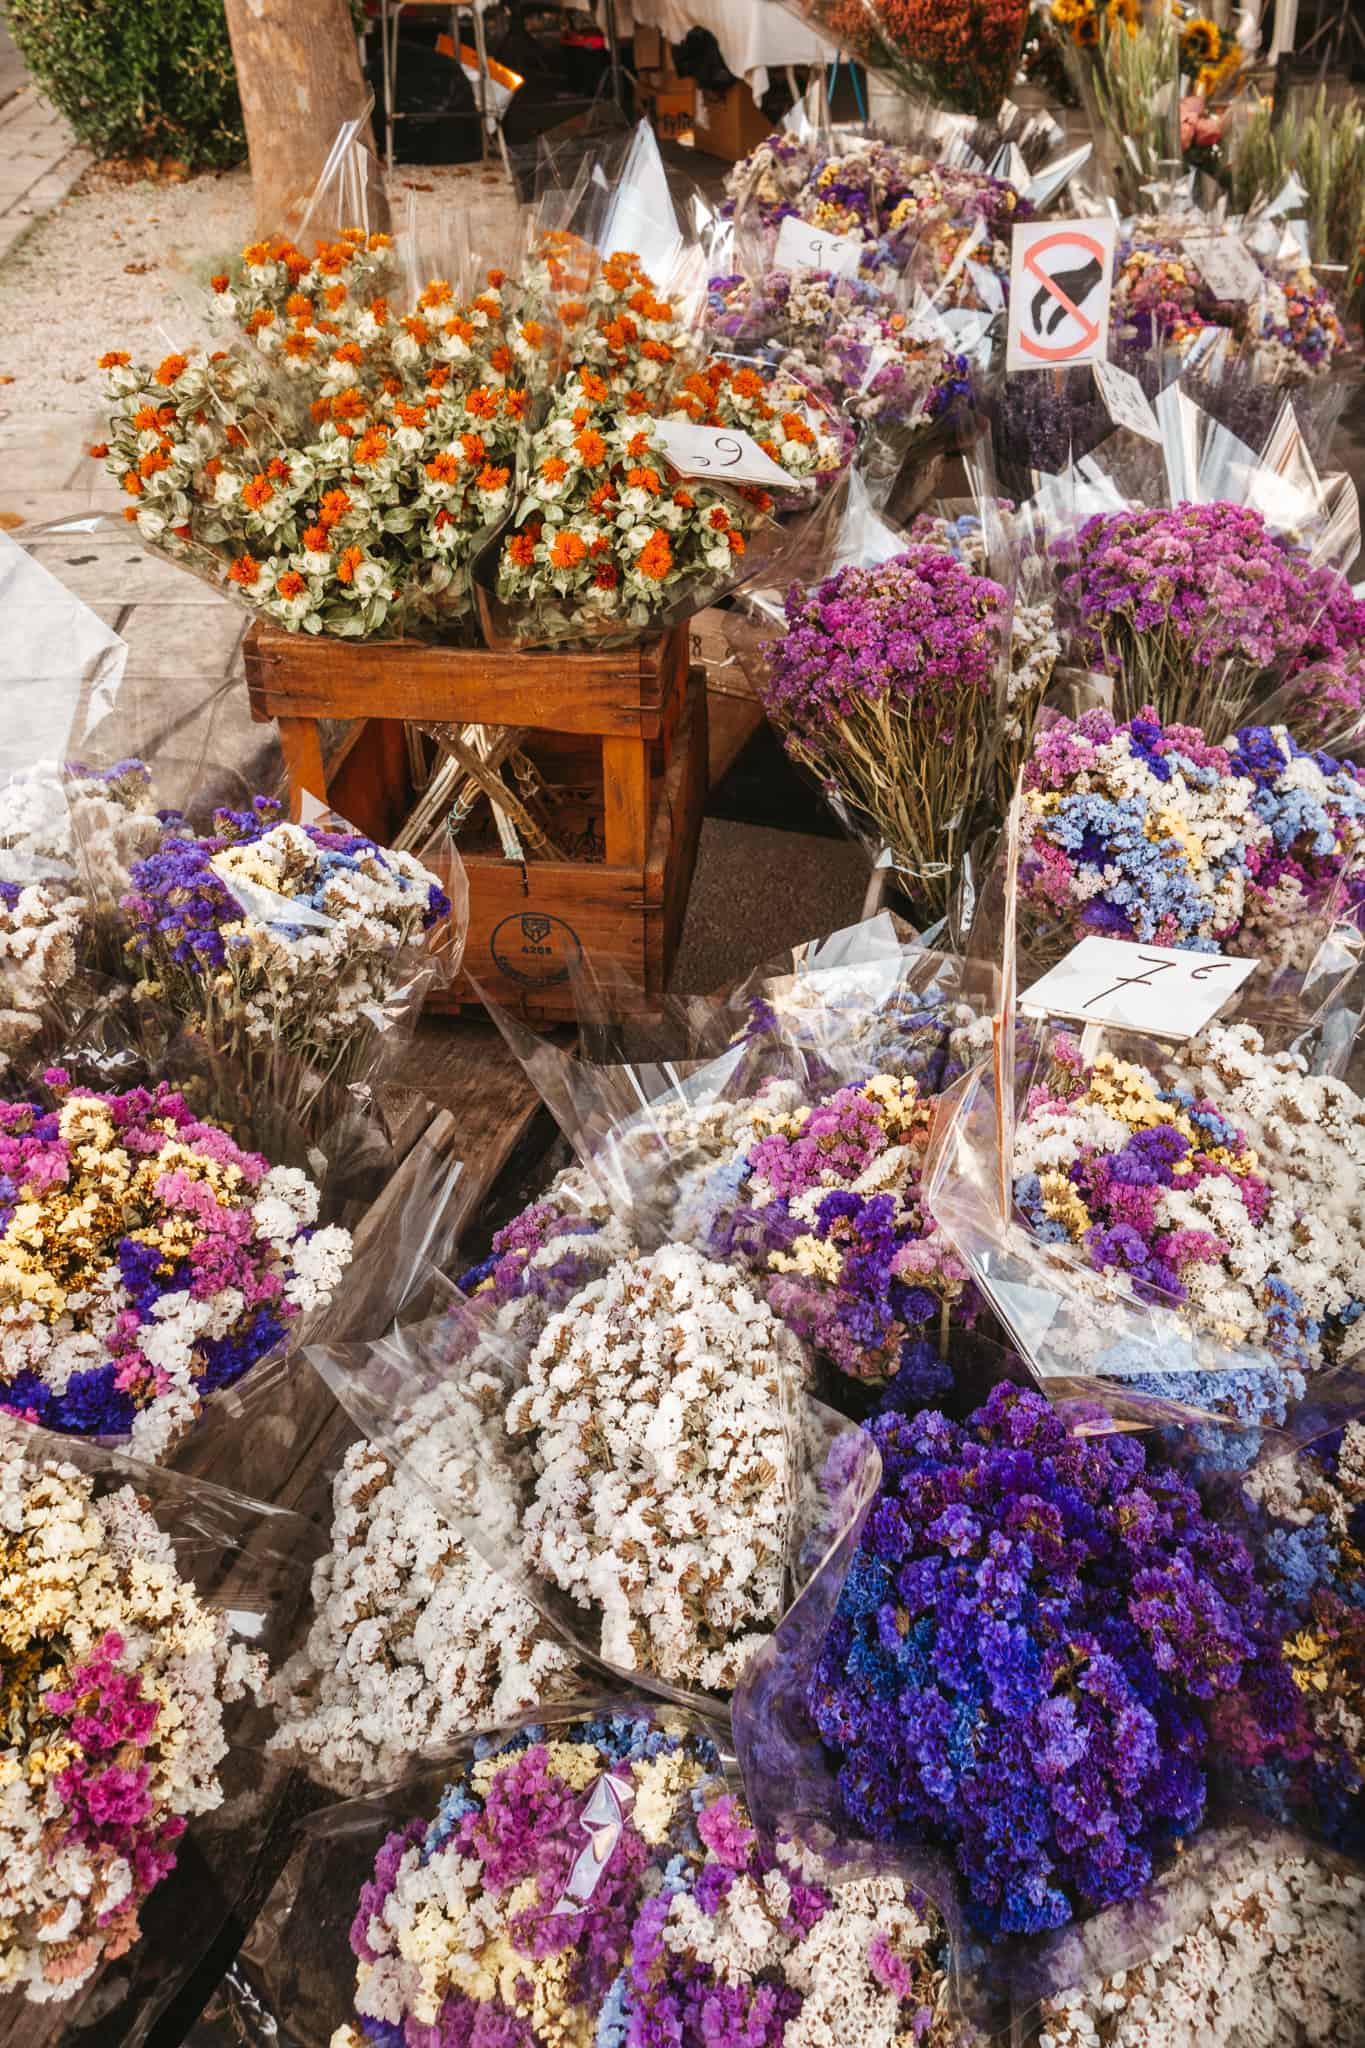 Flowers at the market in St Remy de Provence